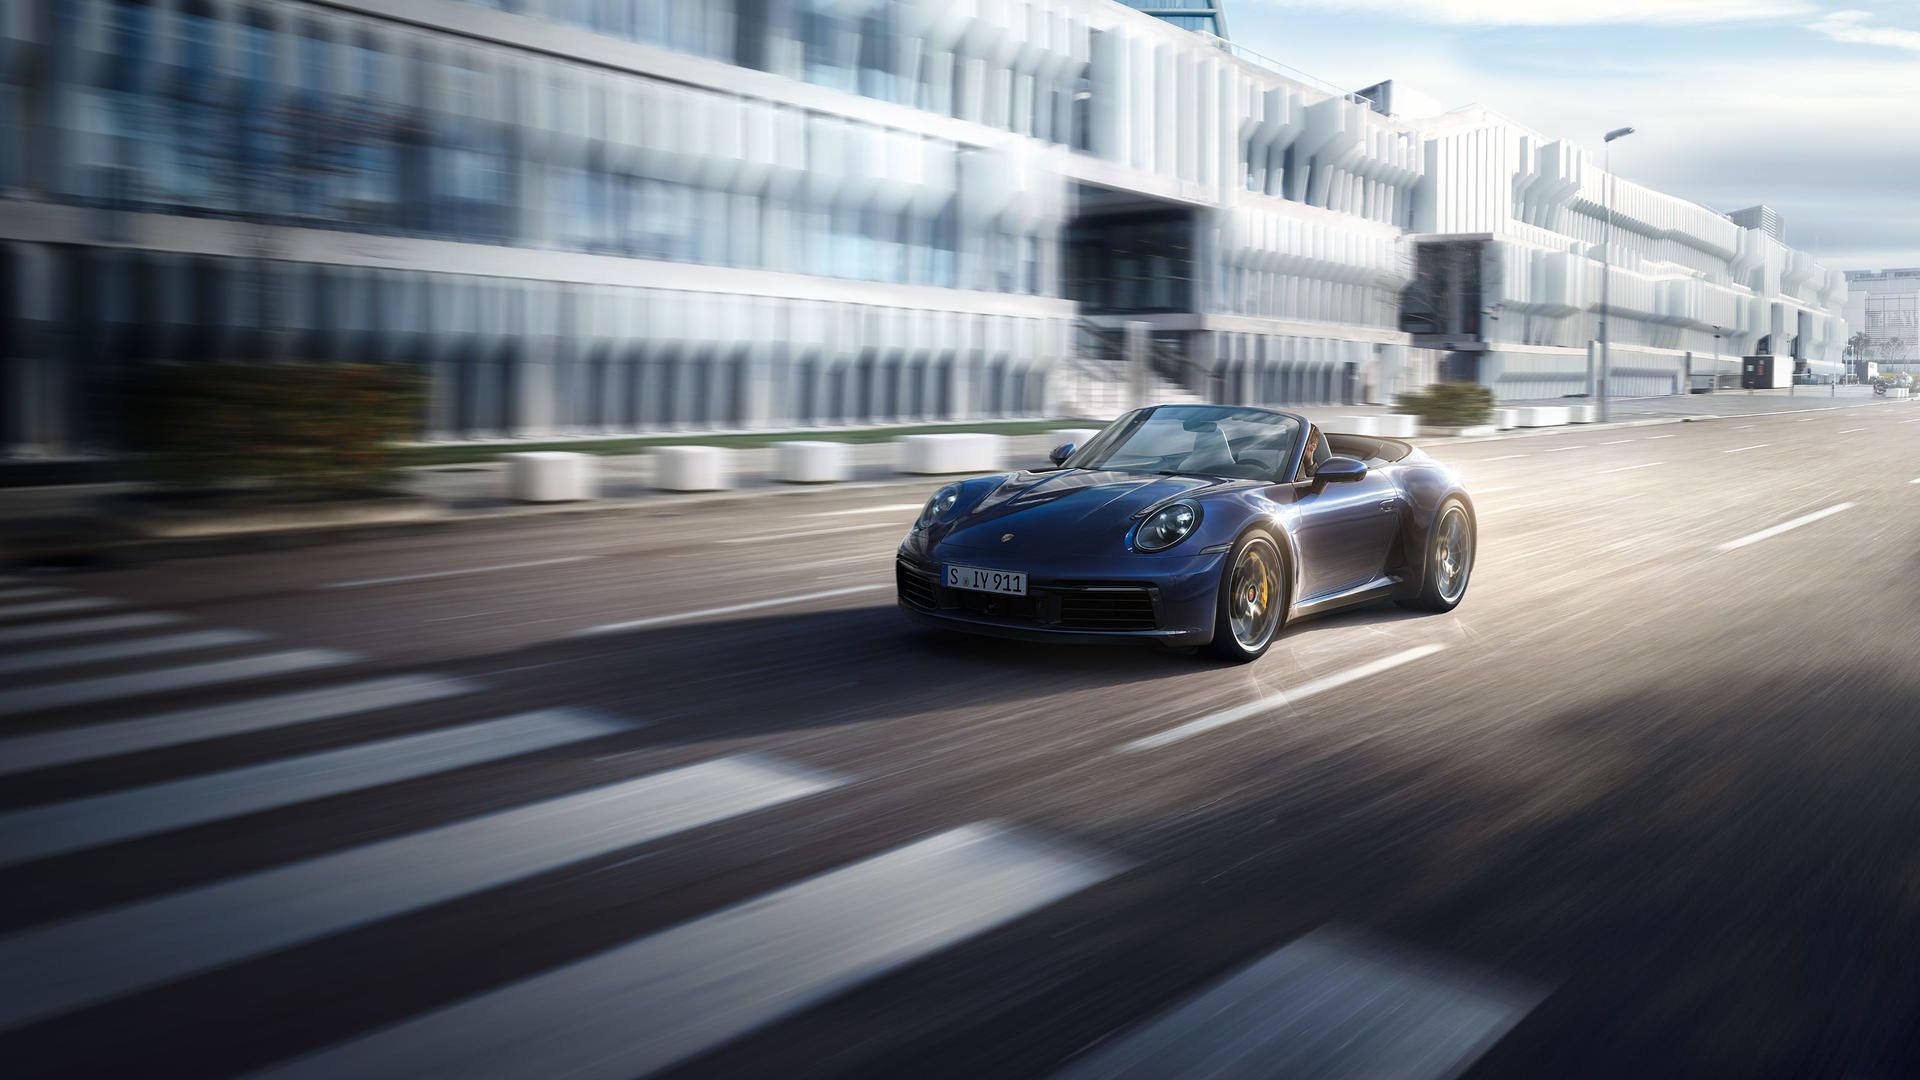 Wallpaper Of The Day: 2020 Porsche 911 Cabriolet Picture, Photo, Wallpaper